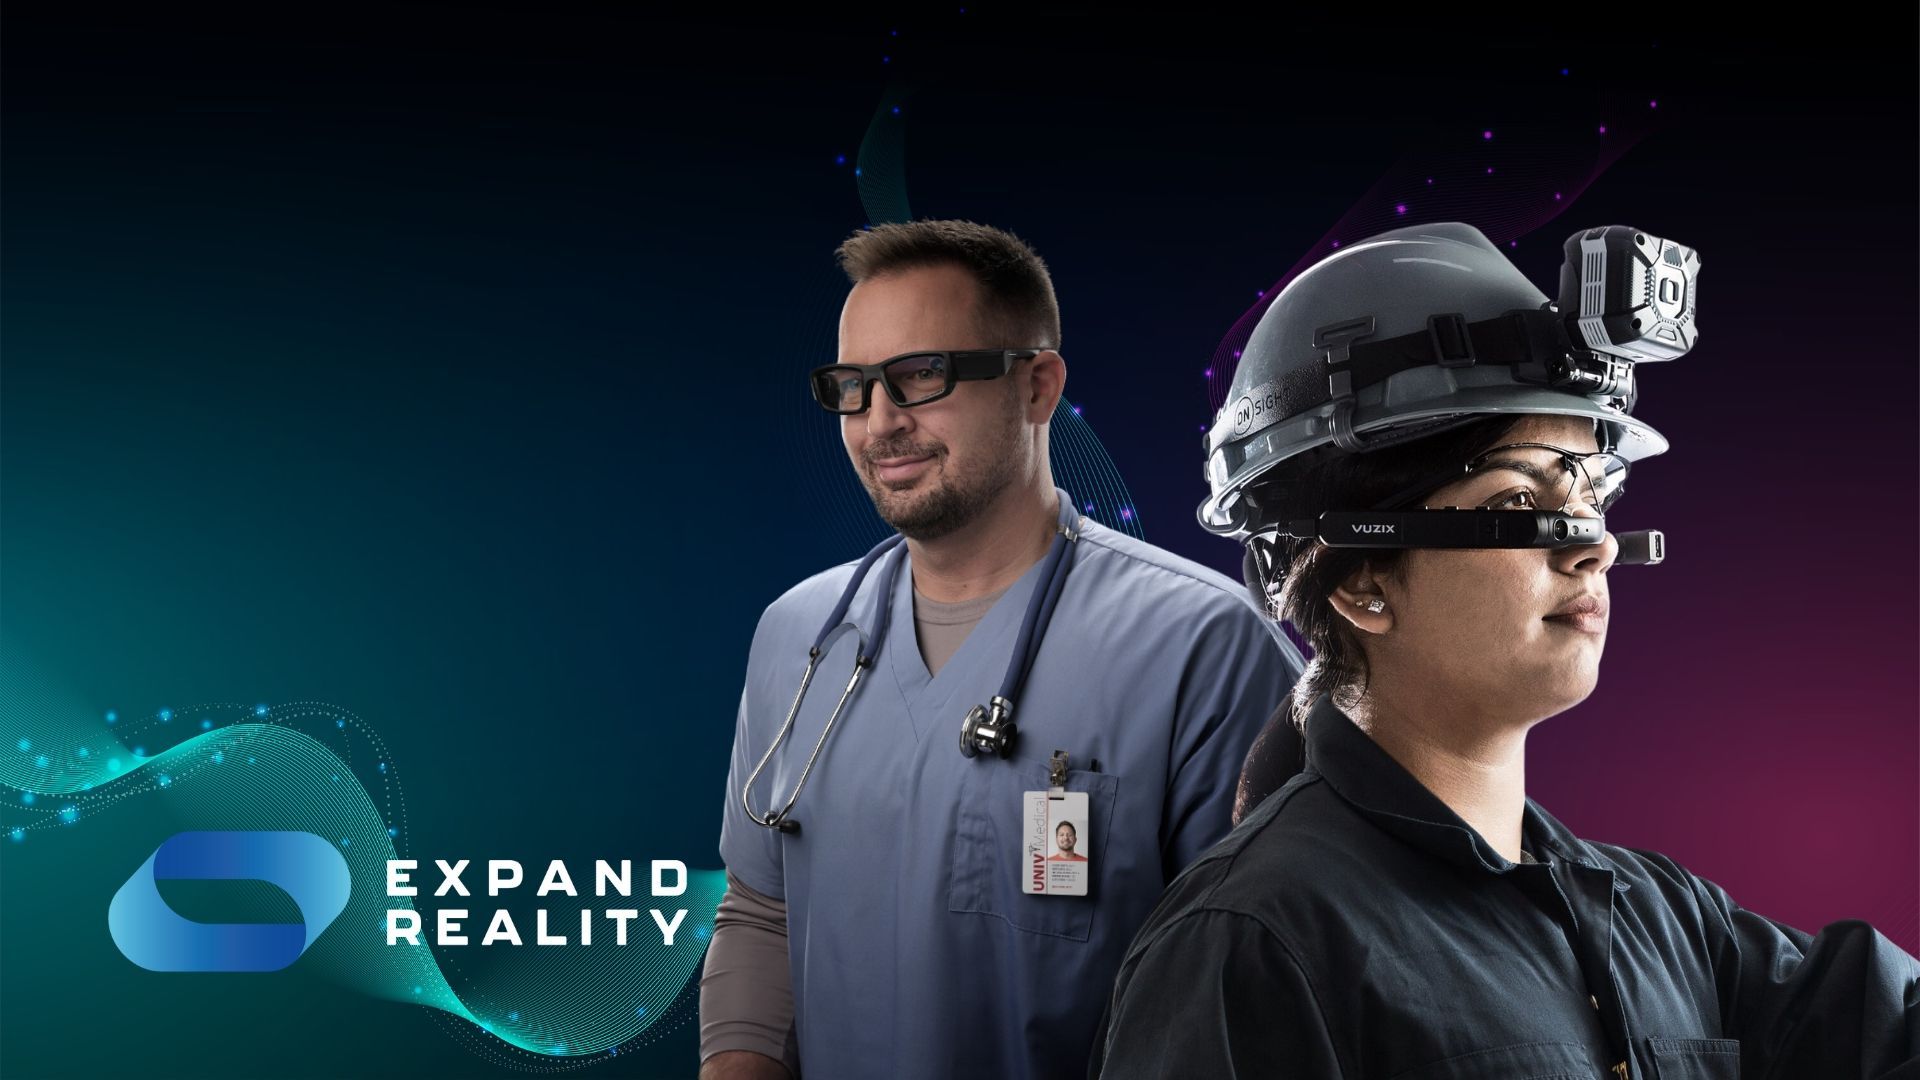 Learn how Vuzix smart glasses have empowered frontline workers at 2 very different organisations – a healthcare provider and a biogas supplier.